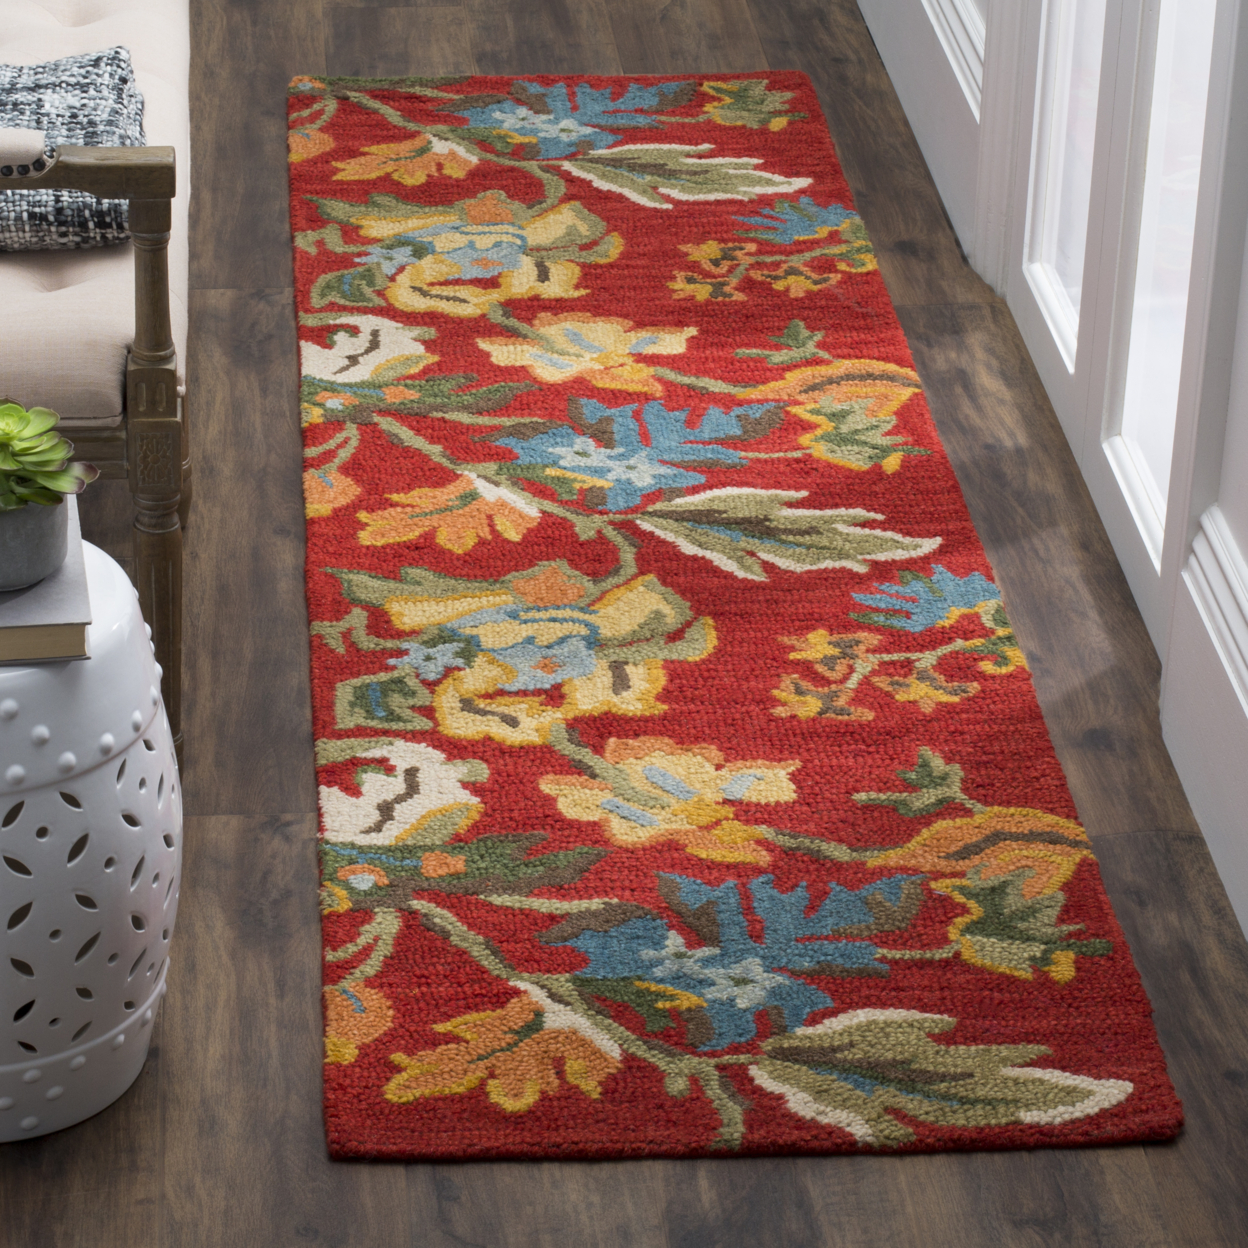 SAFAVIEH Blossom BLM672A Hand-hooked Red / Multi Rug - 8' X 10'